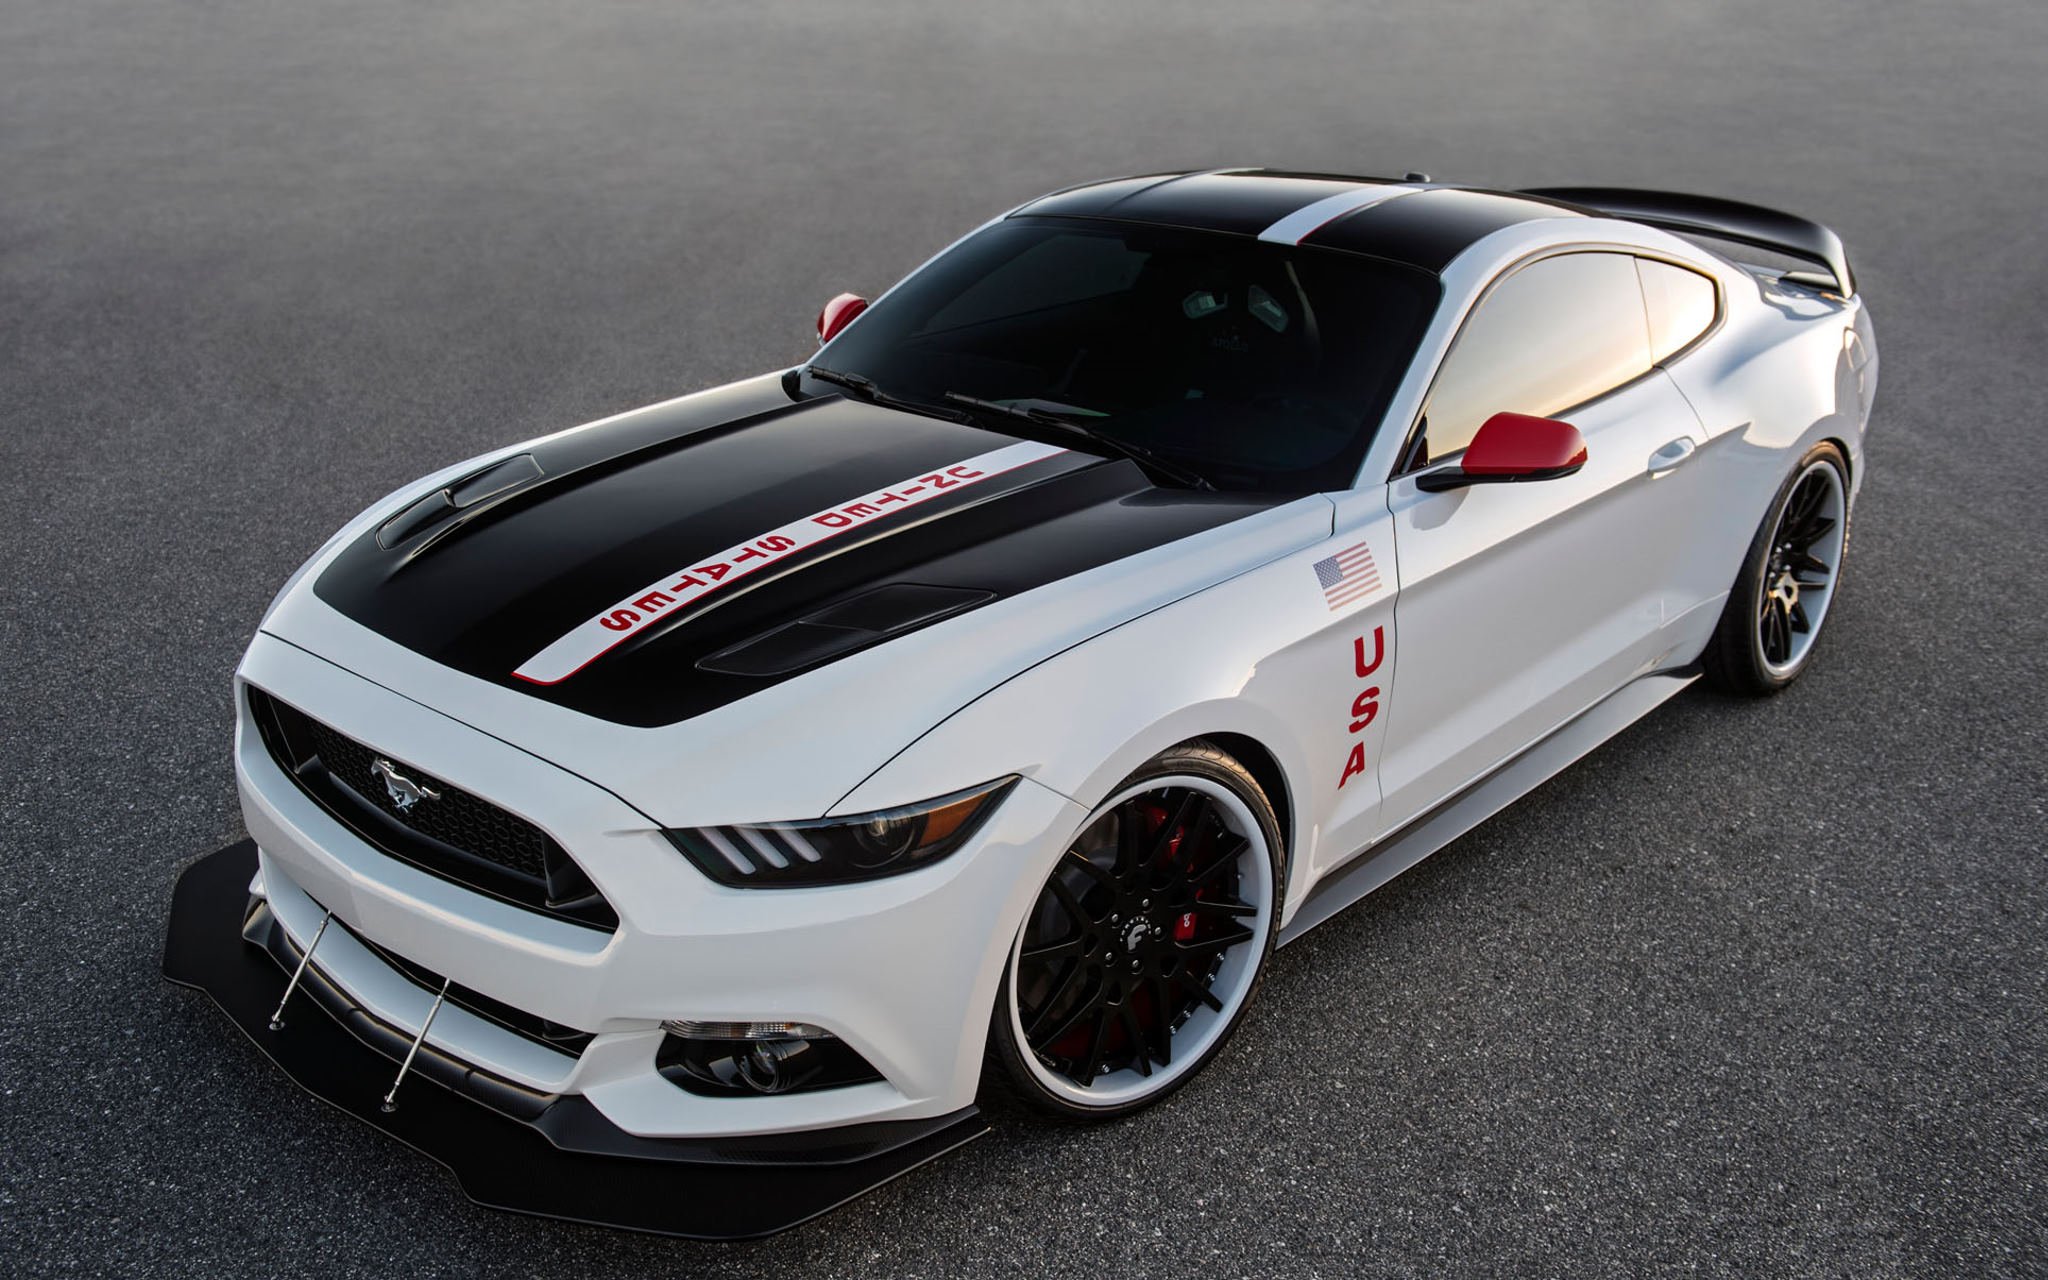 2015, Ford, Mustang, Gt, Apollo, Edition, Muscle, Supercar, Usa,  04 Wallpaper